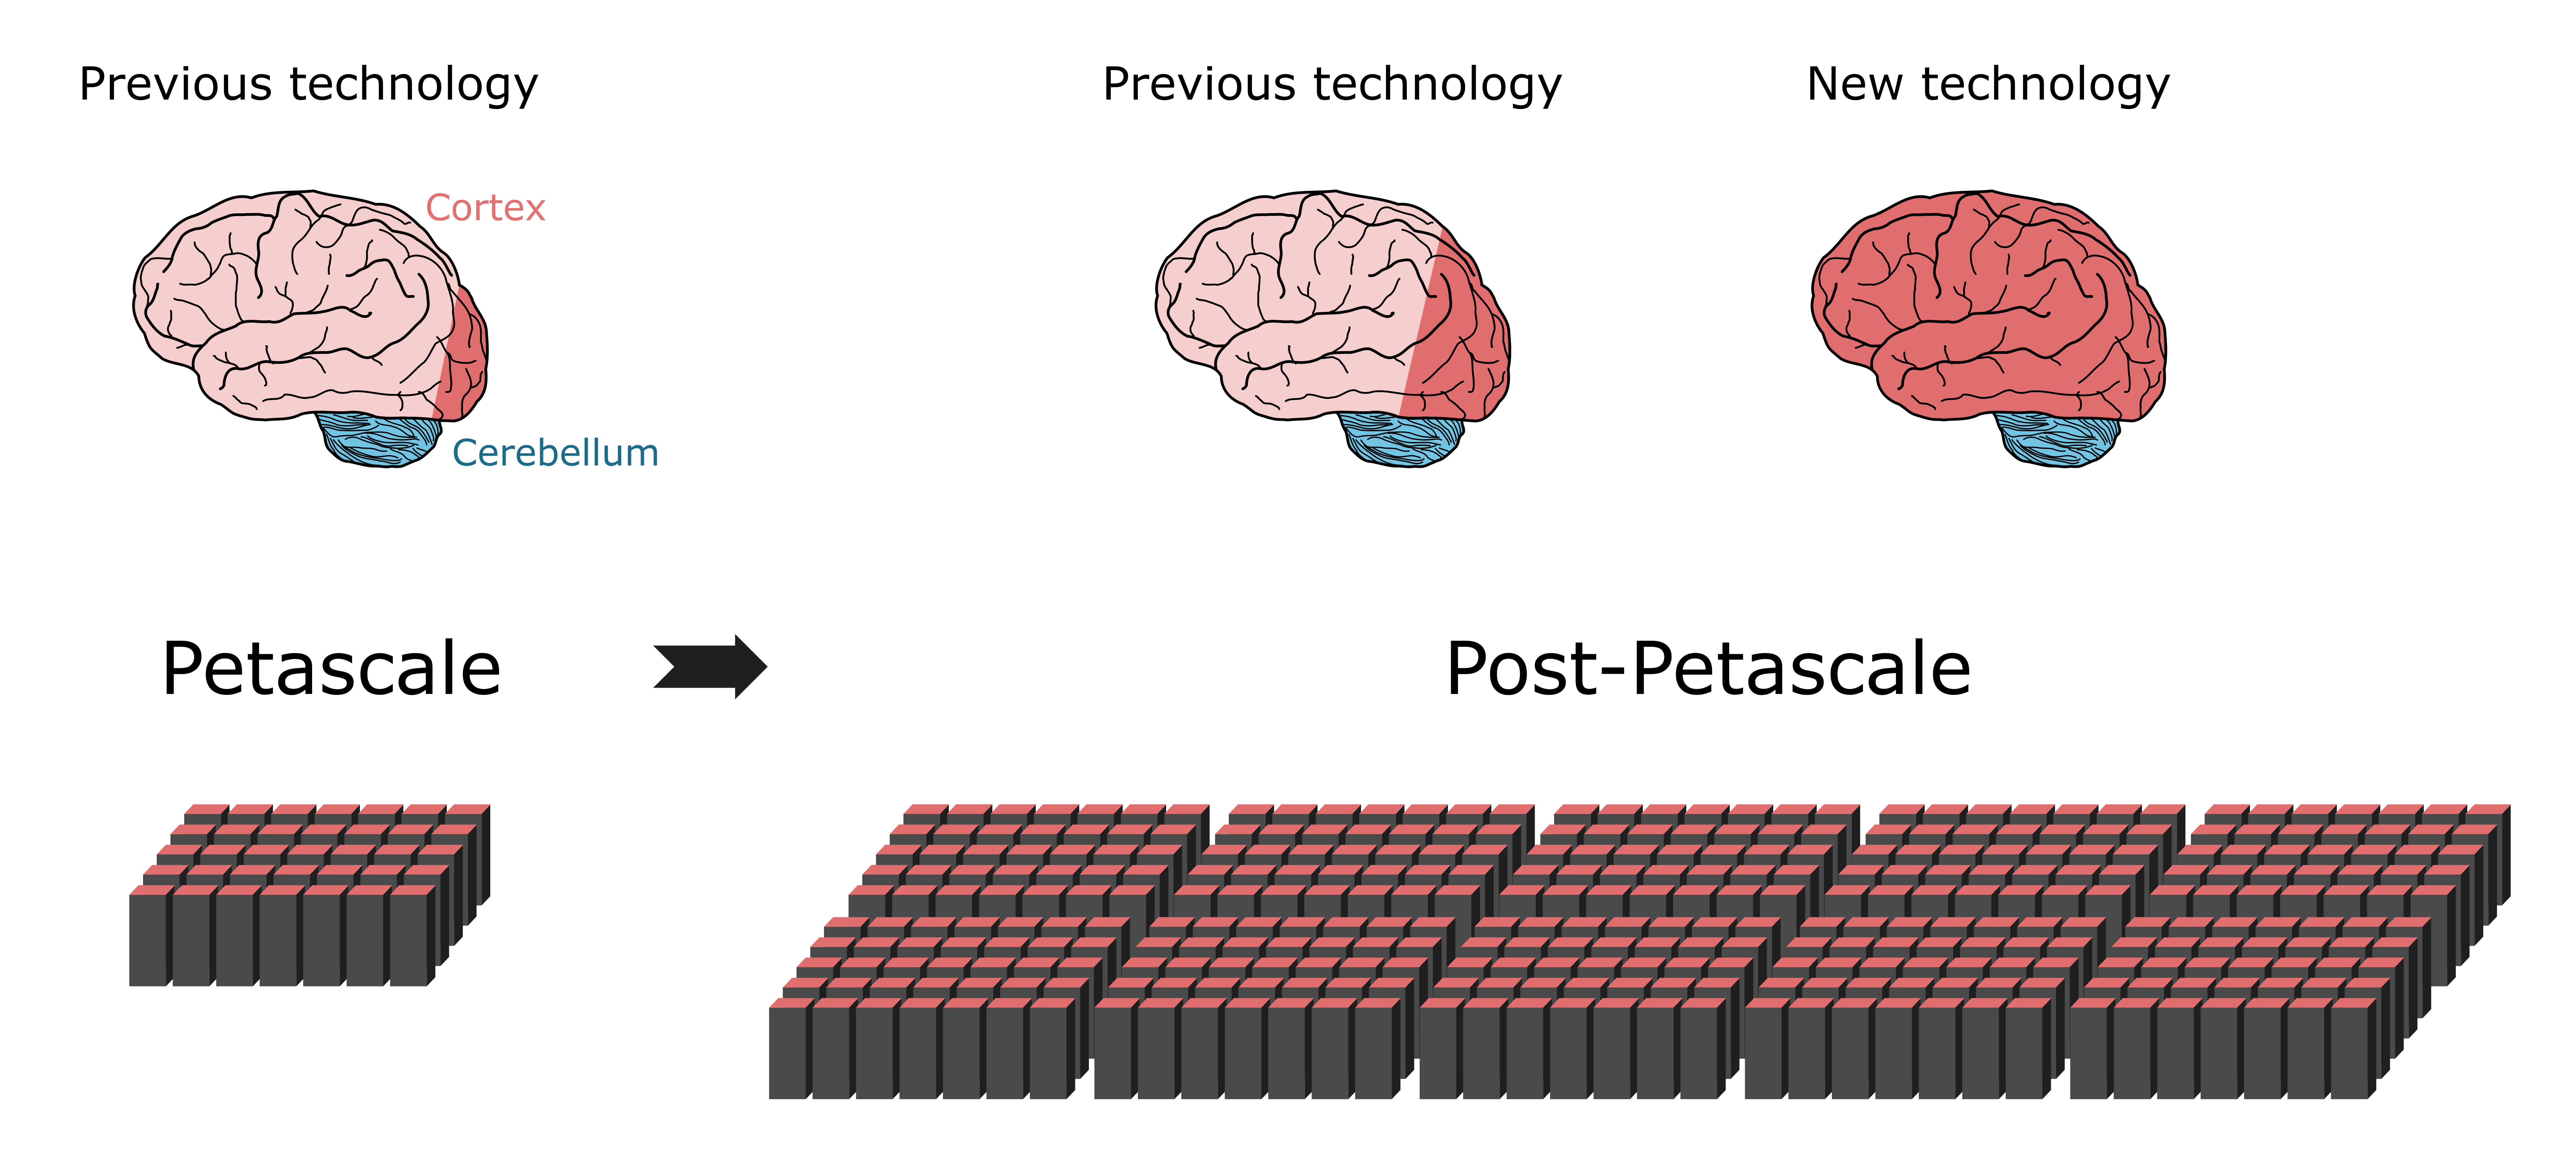 Previous simulation technology can represent about 1% of nerve cells in a human brain using a petascale supercomputer.